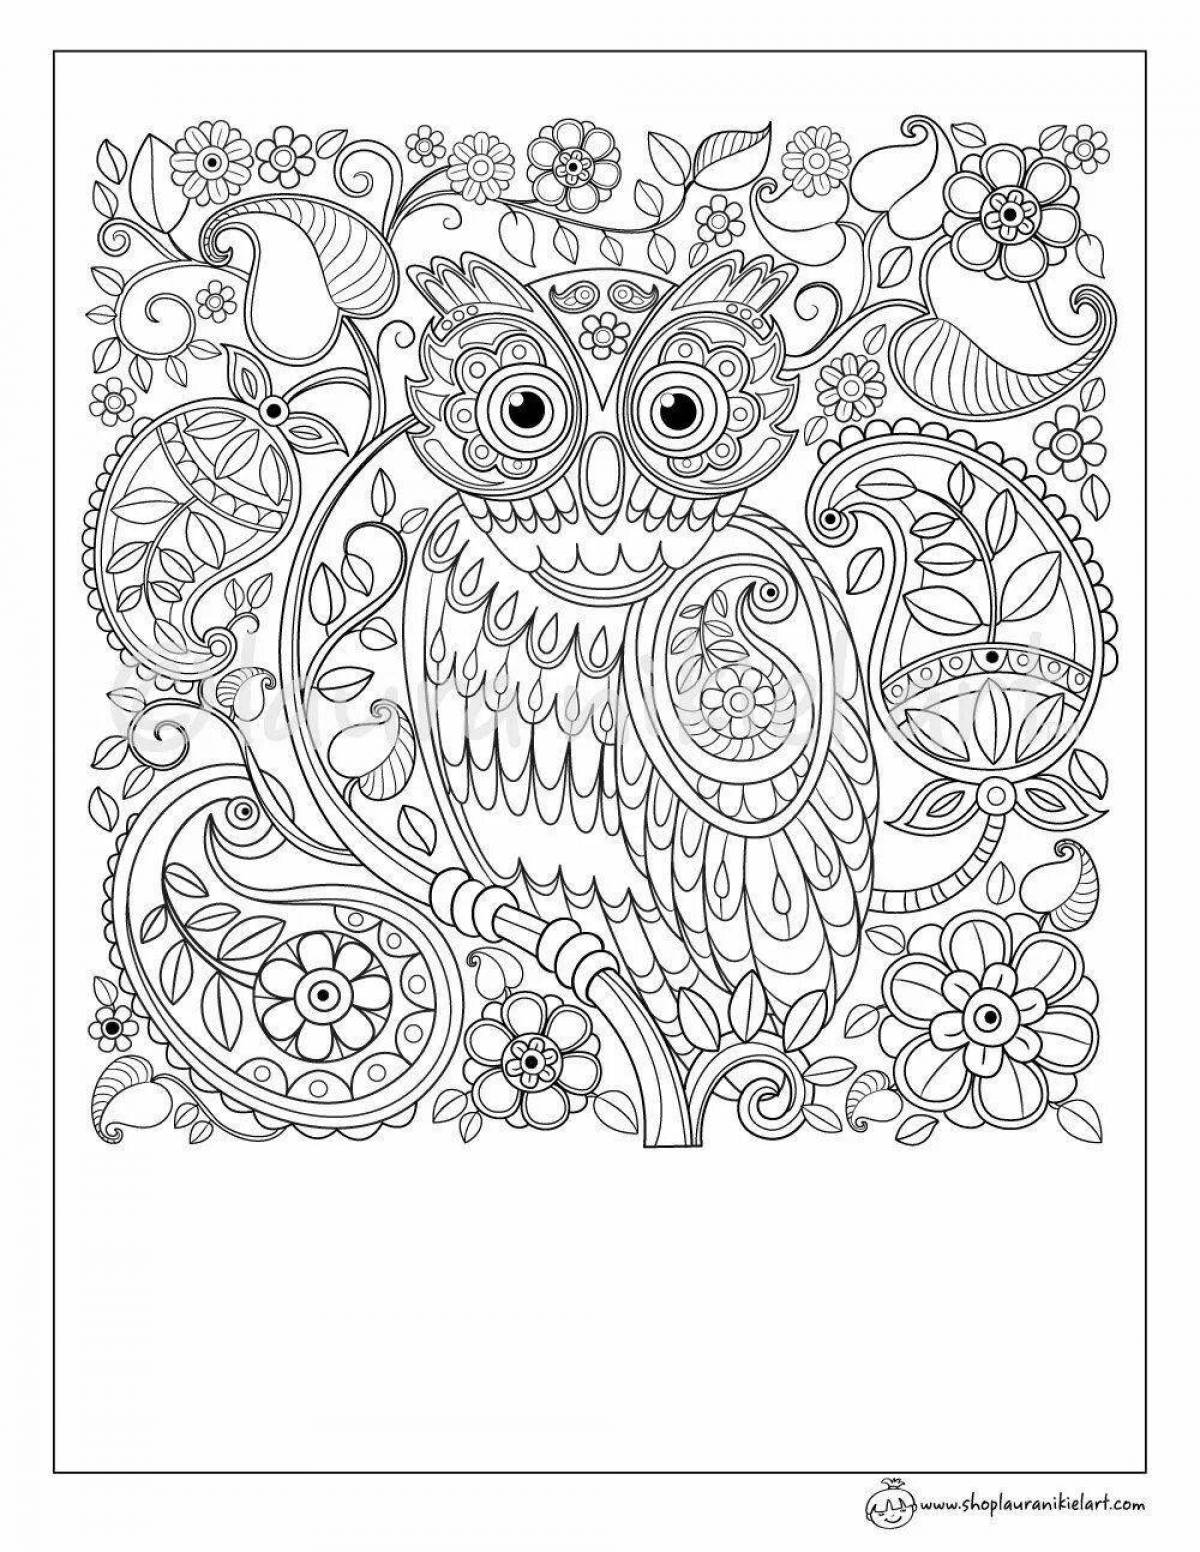 Ornate complex owl coloring page